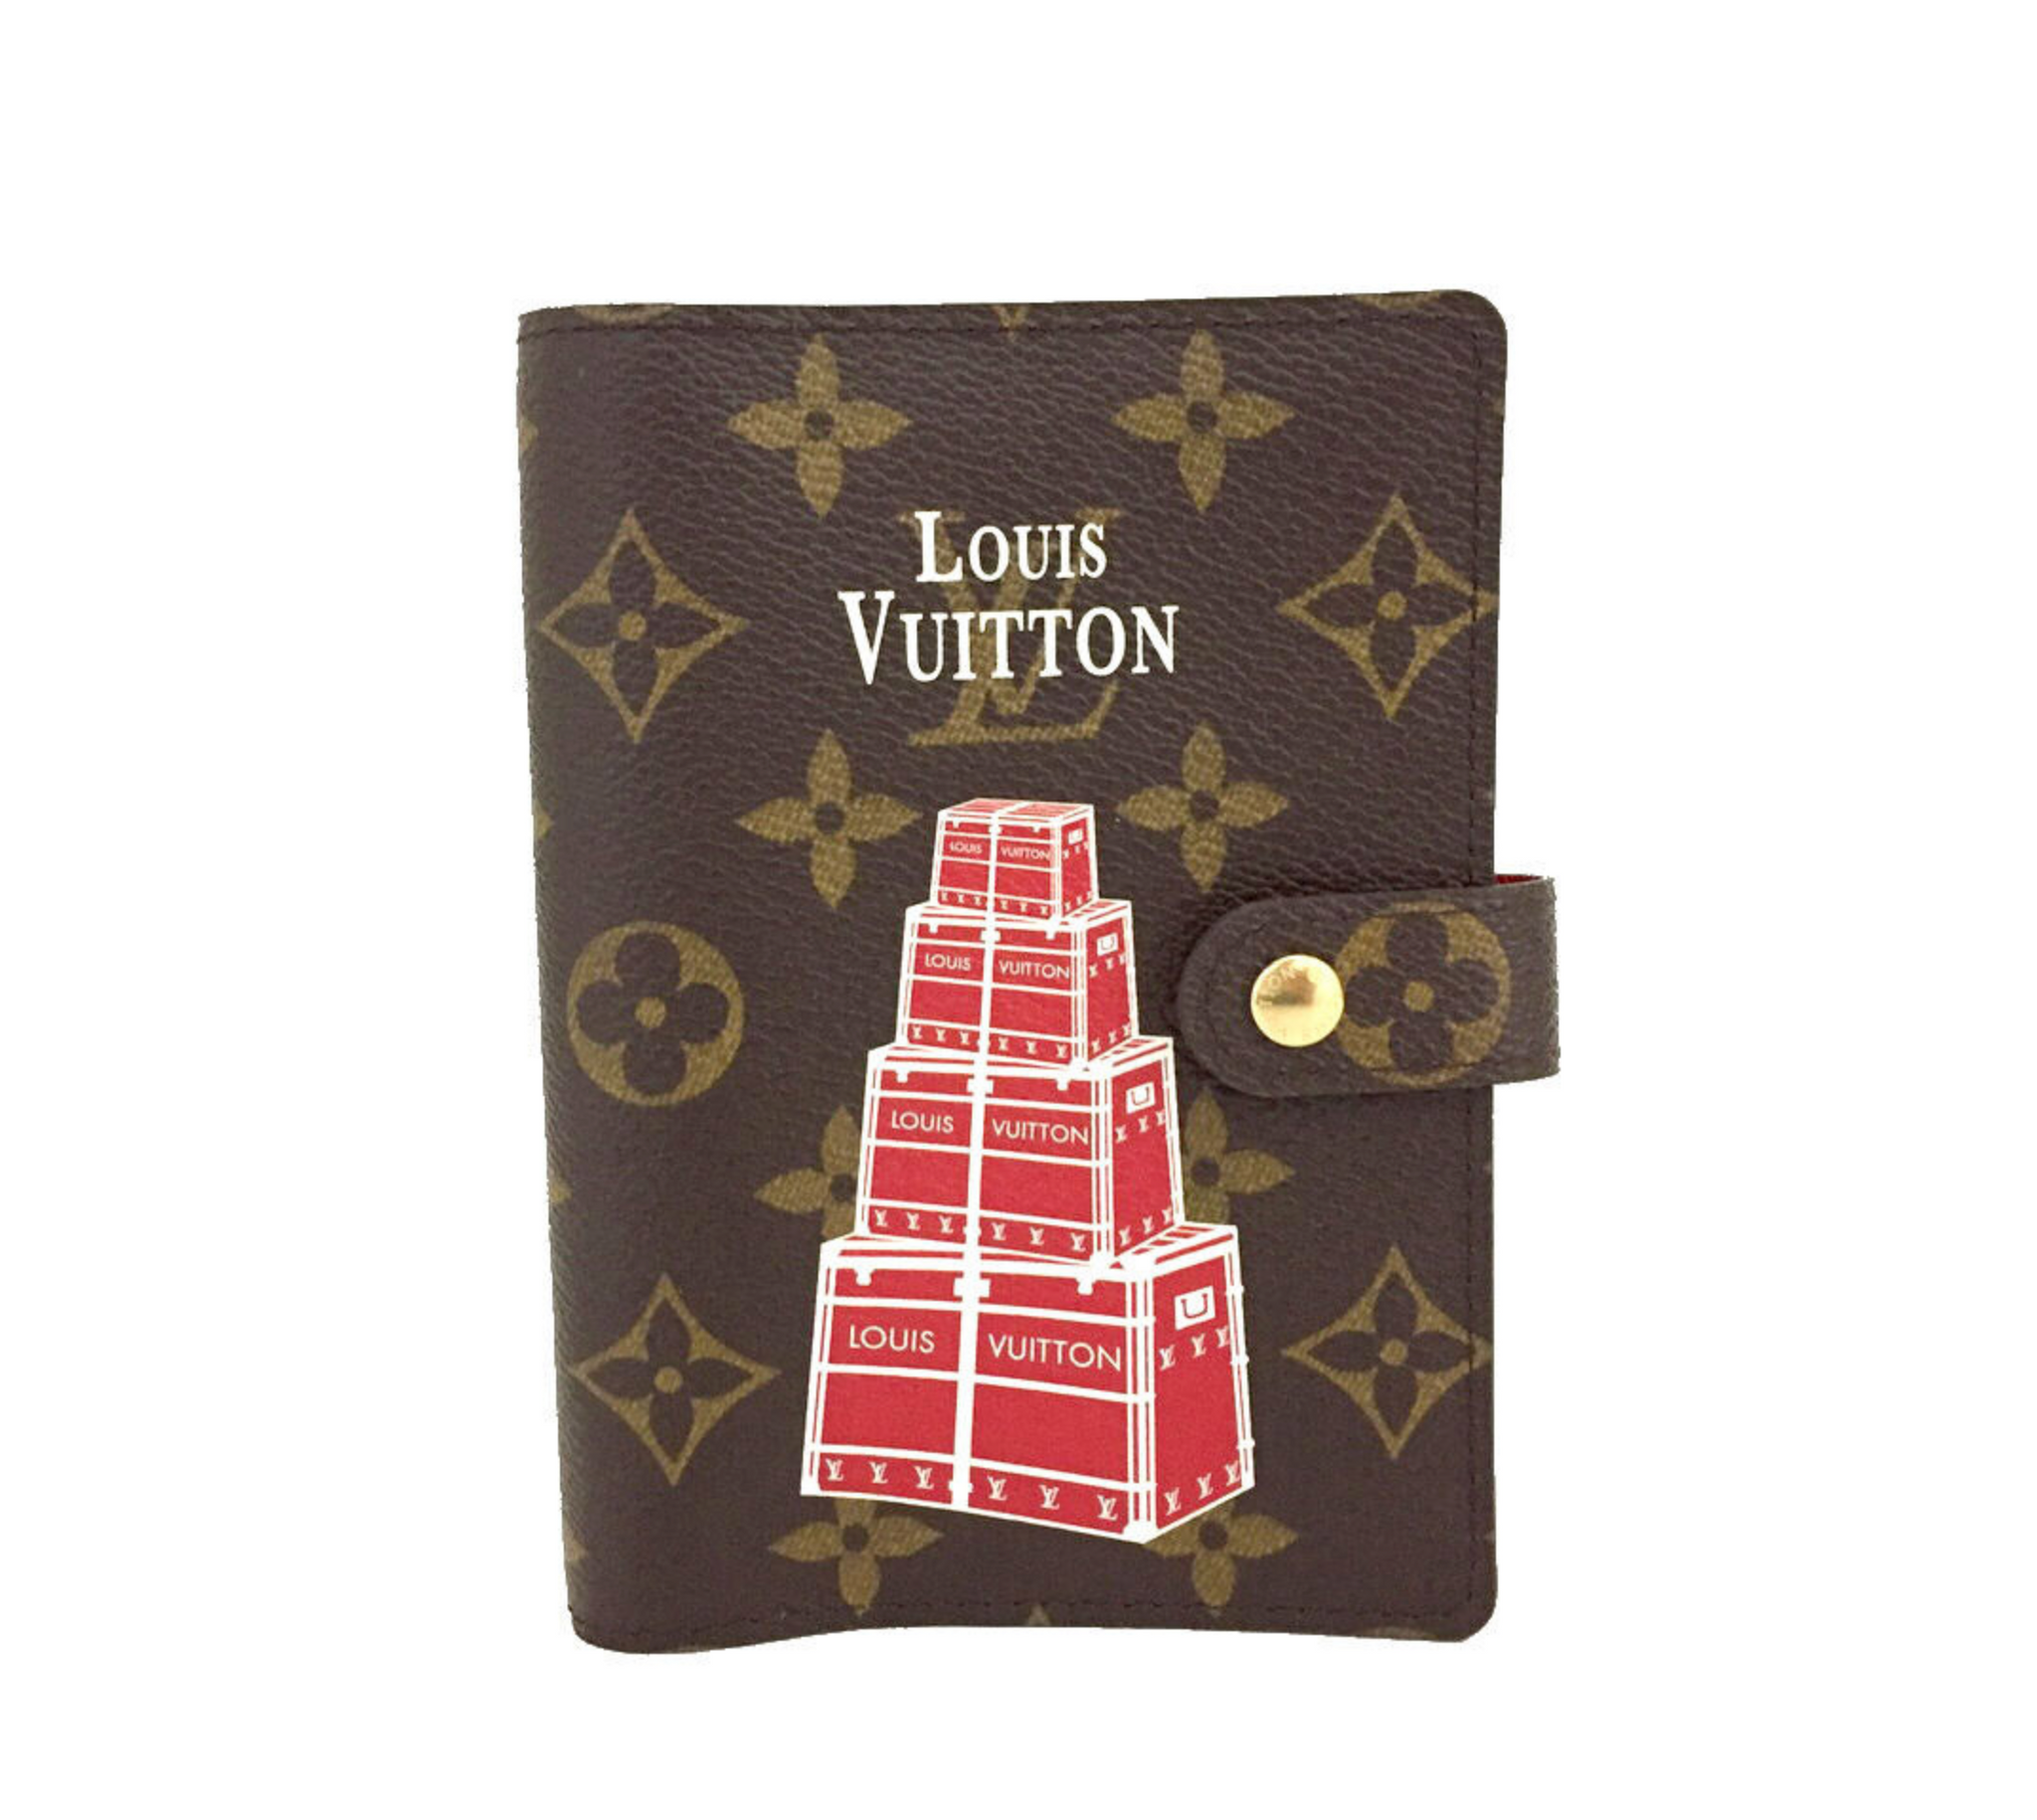 LIMITED EDITION Louis Vuitton Monogram Trunks Agenda PM Day Planner Cover CA3078 030623